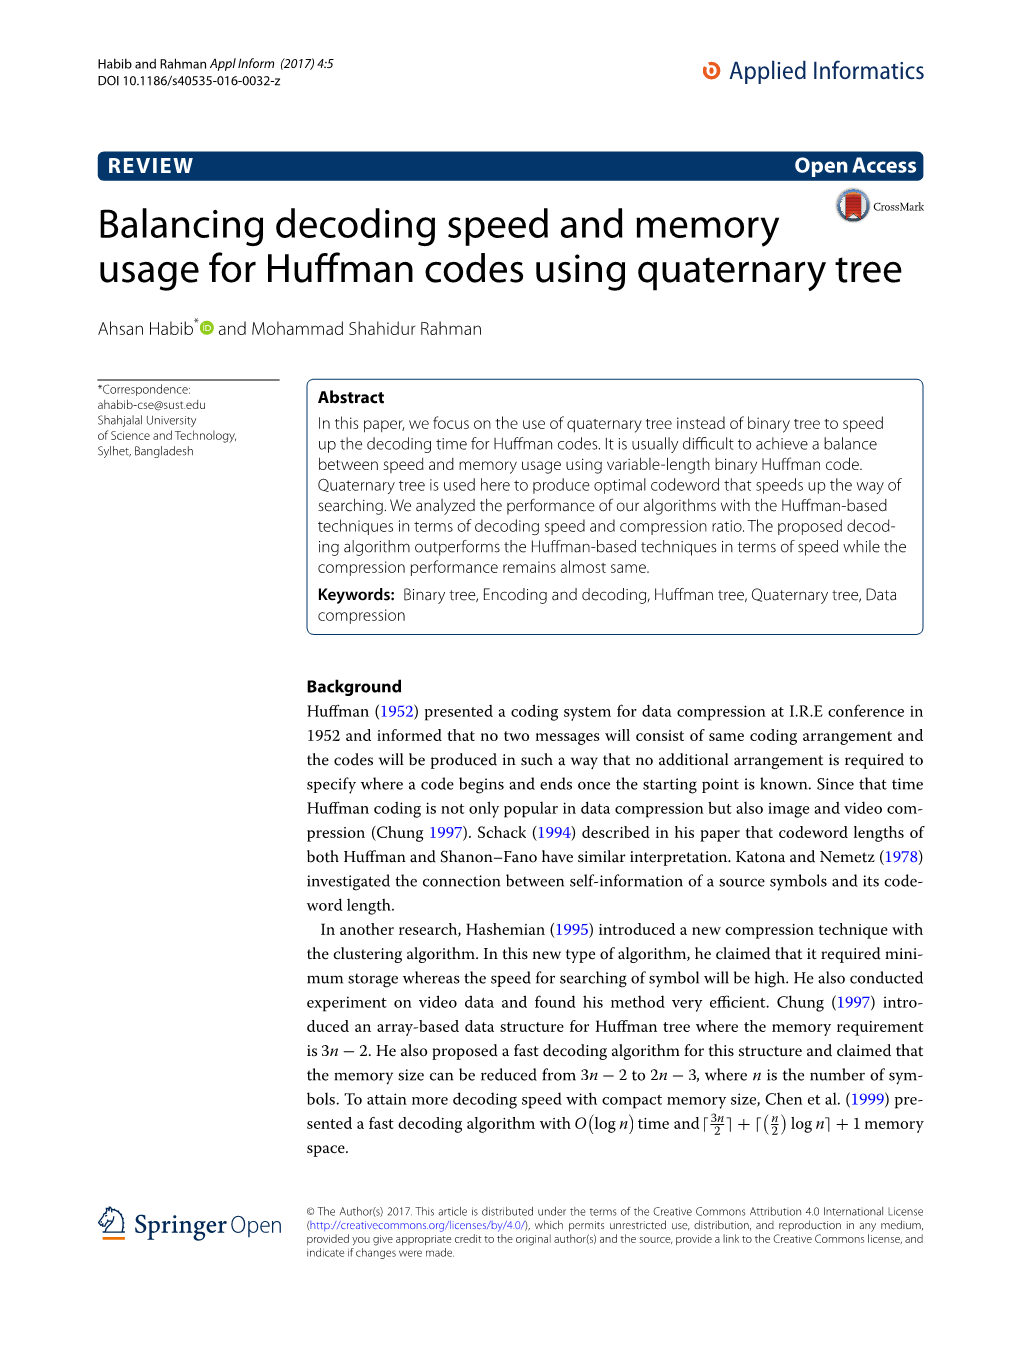 Balancing Decoding Speed and Memory Usage for Huffman Codes Using Quaternary Tree